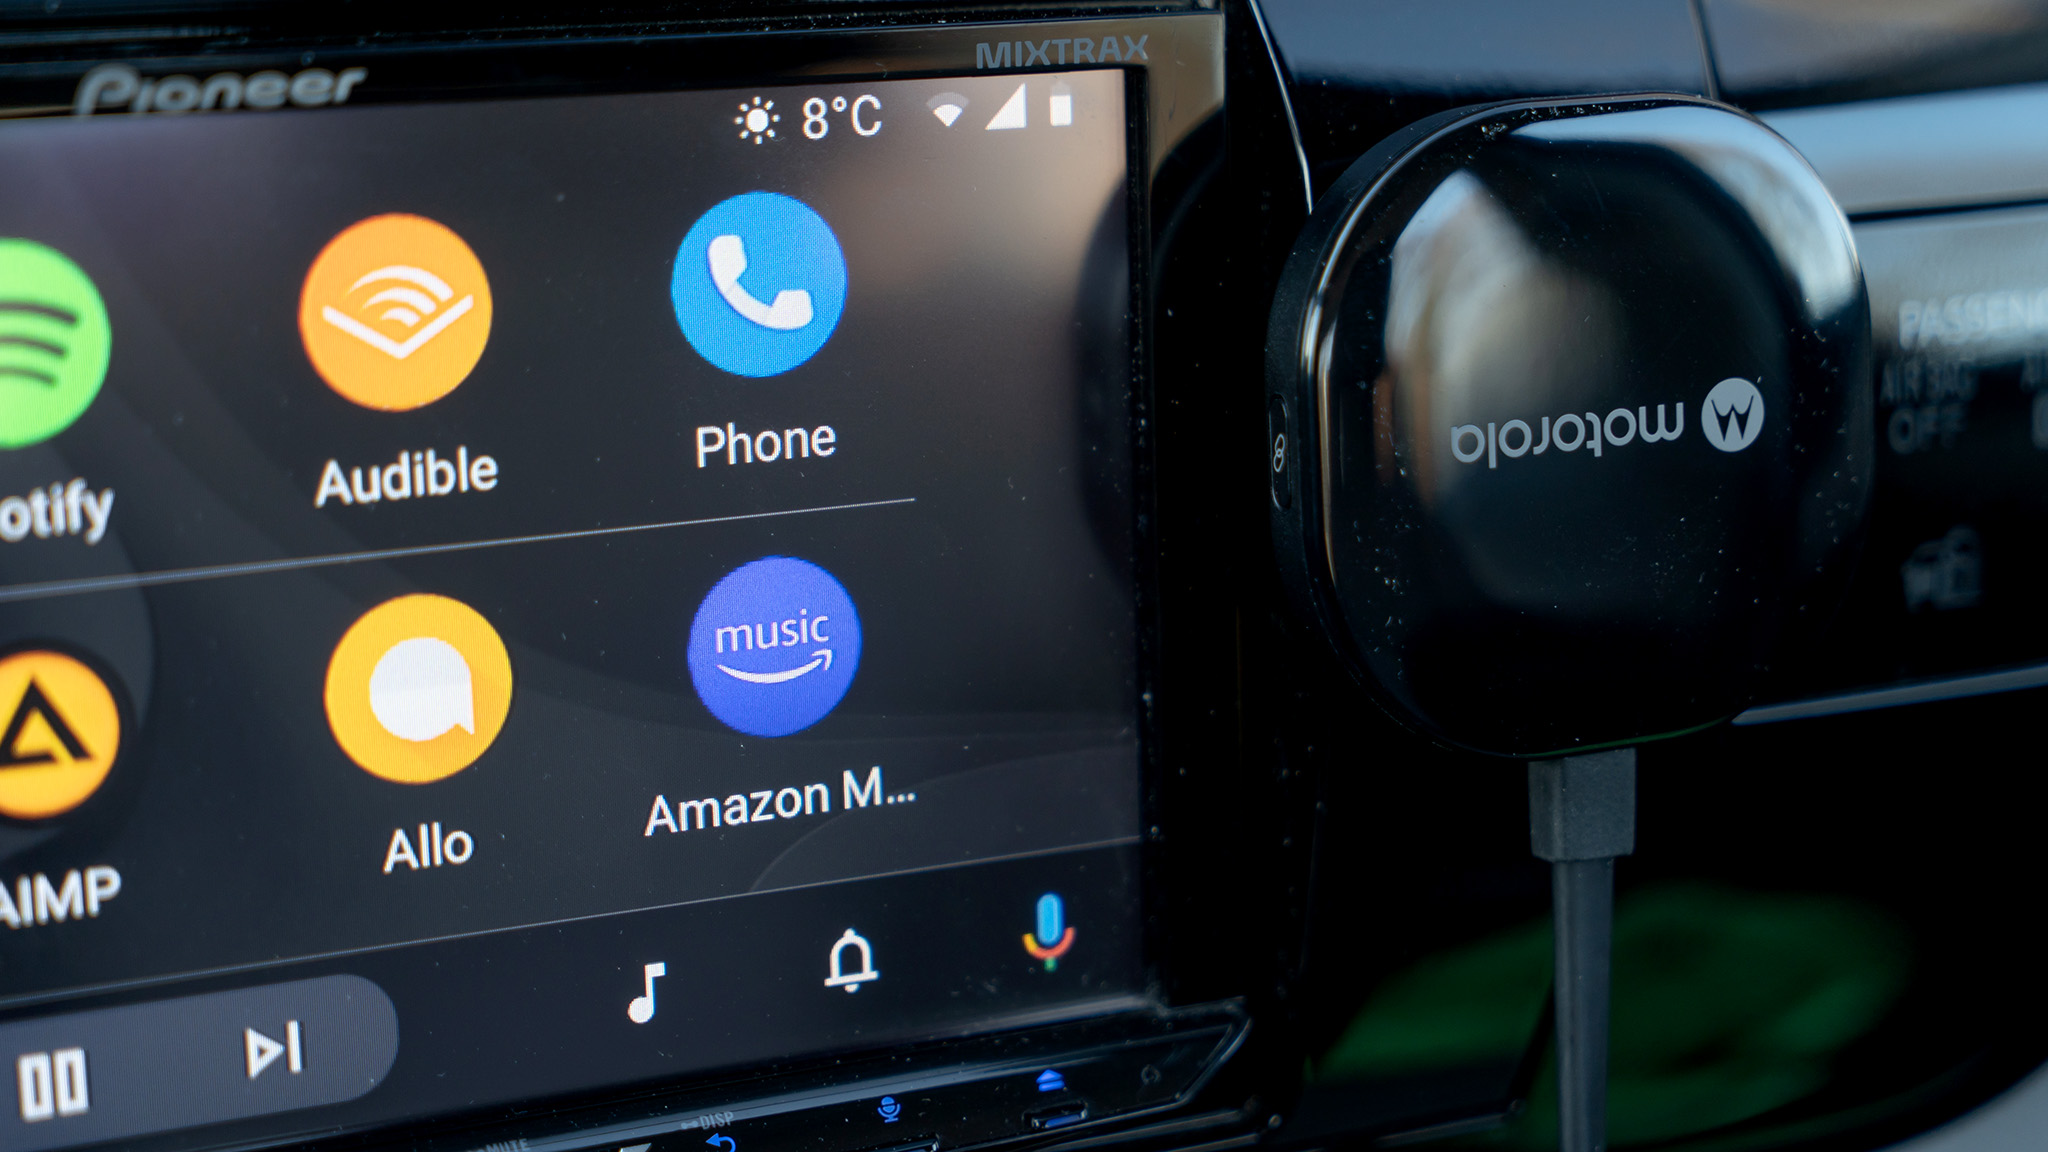 Motorola MA1 phone next to the Android Auto screen.